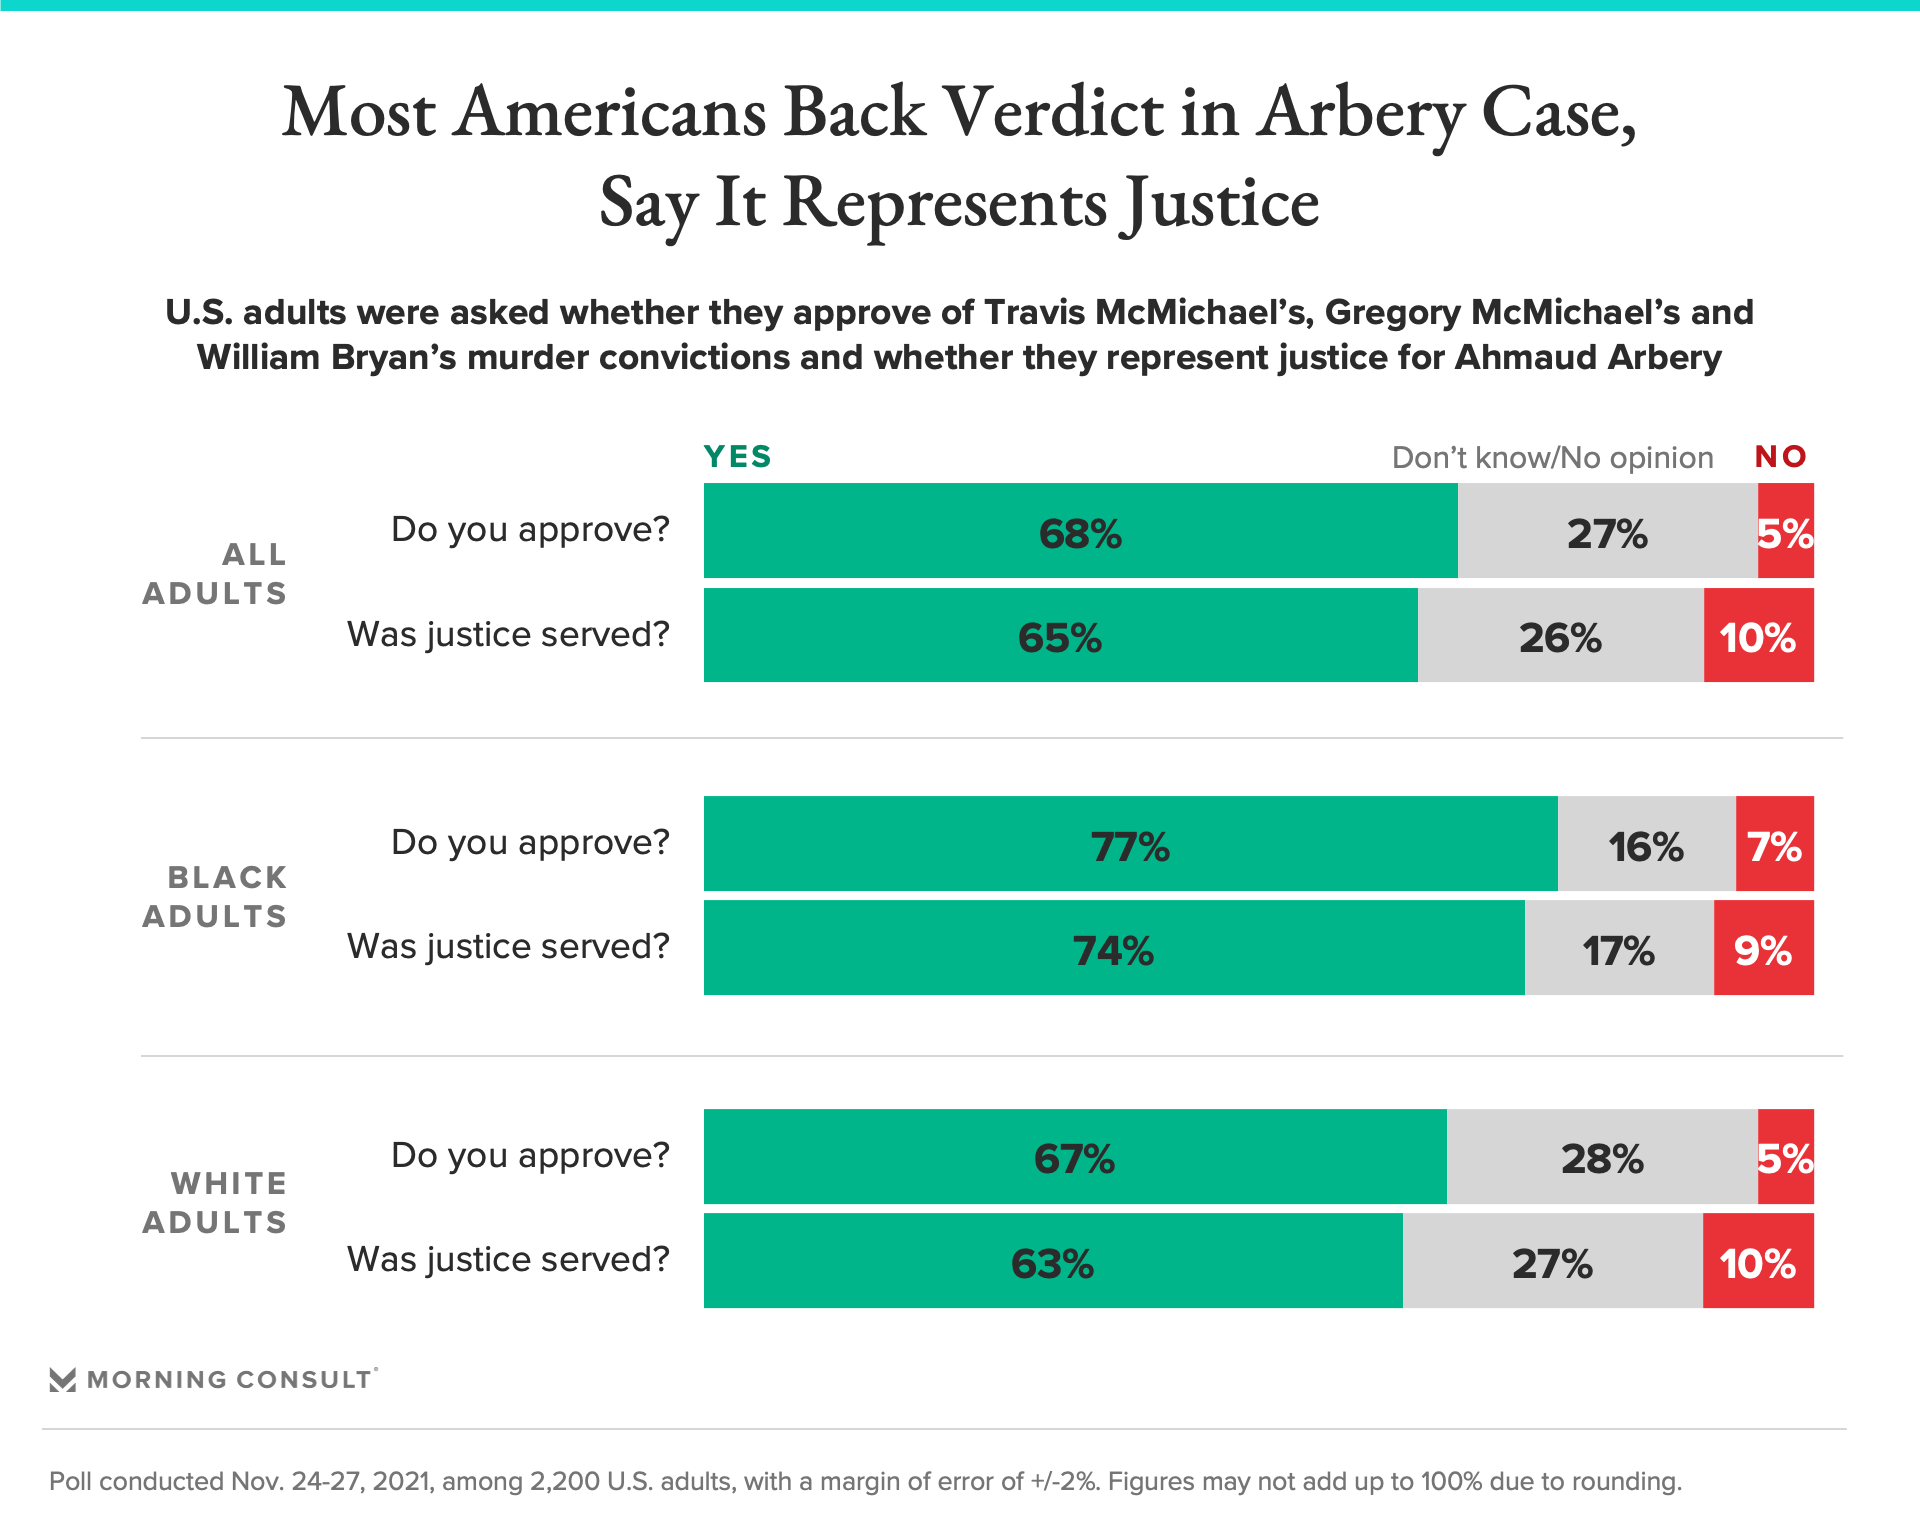 68% approve of guilty verdicts; 65% see justice for Ahmaud Arbery